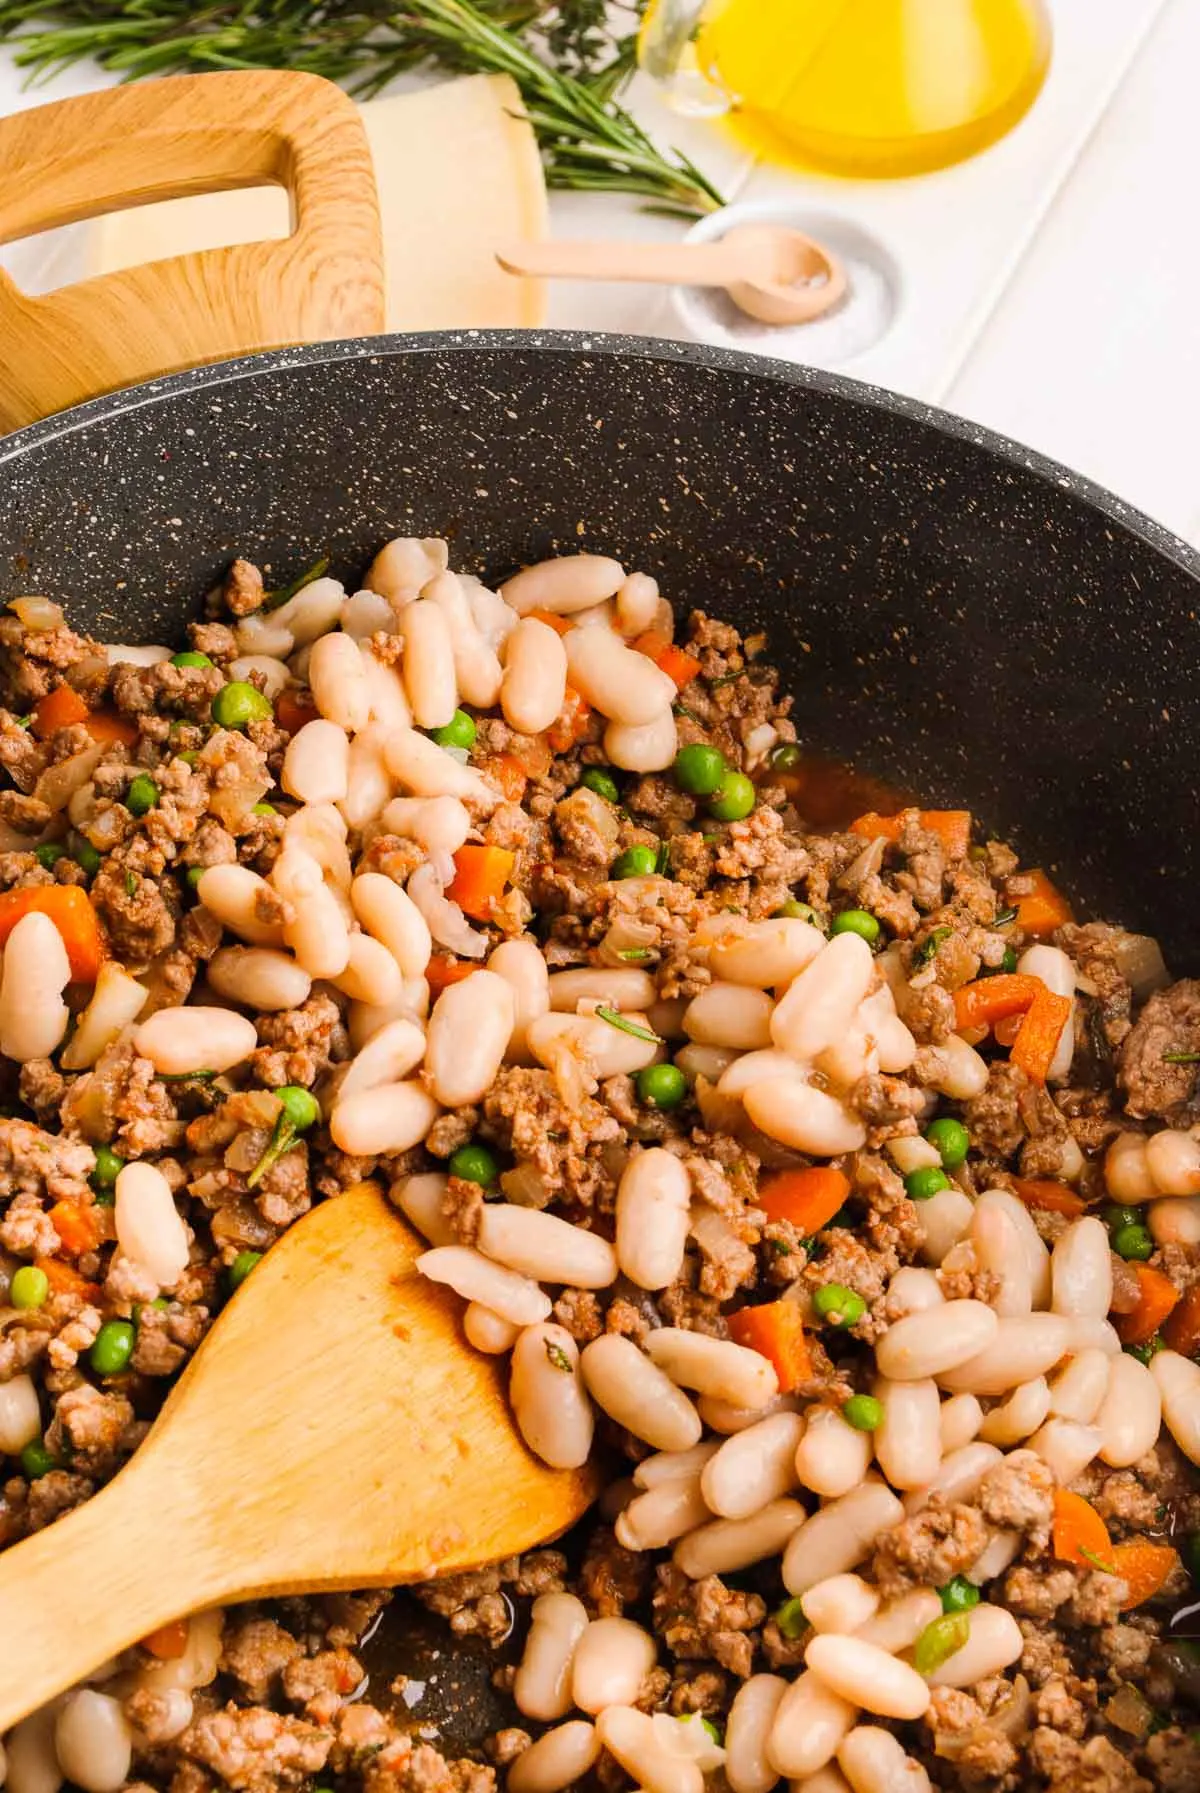 Ground beef shepherd's pie filling with great northern beans.